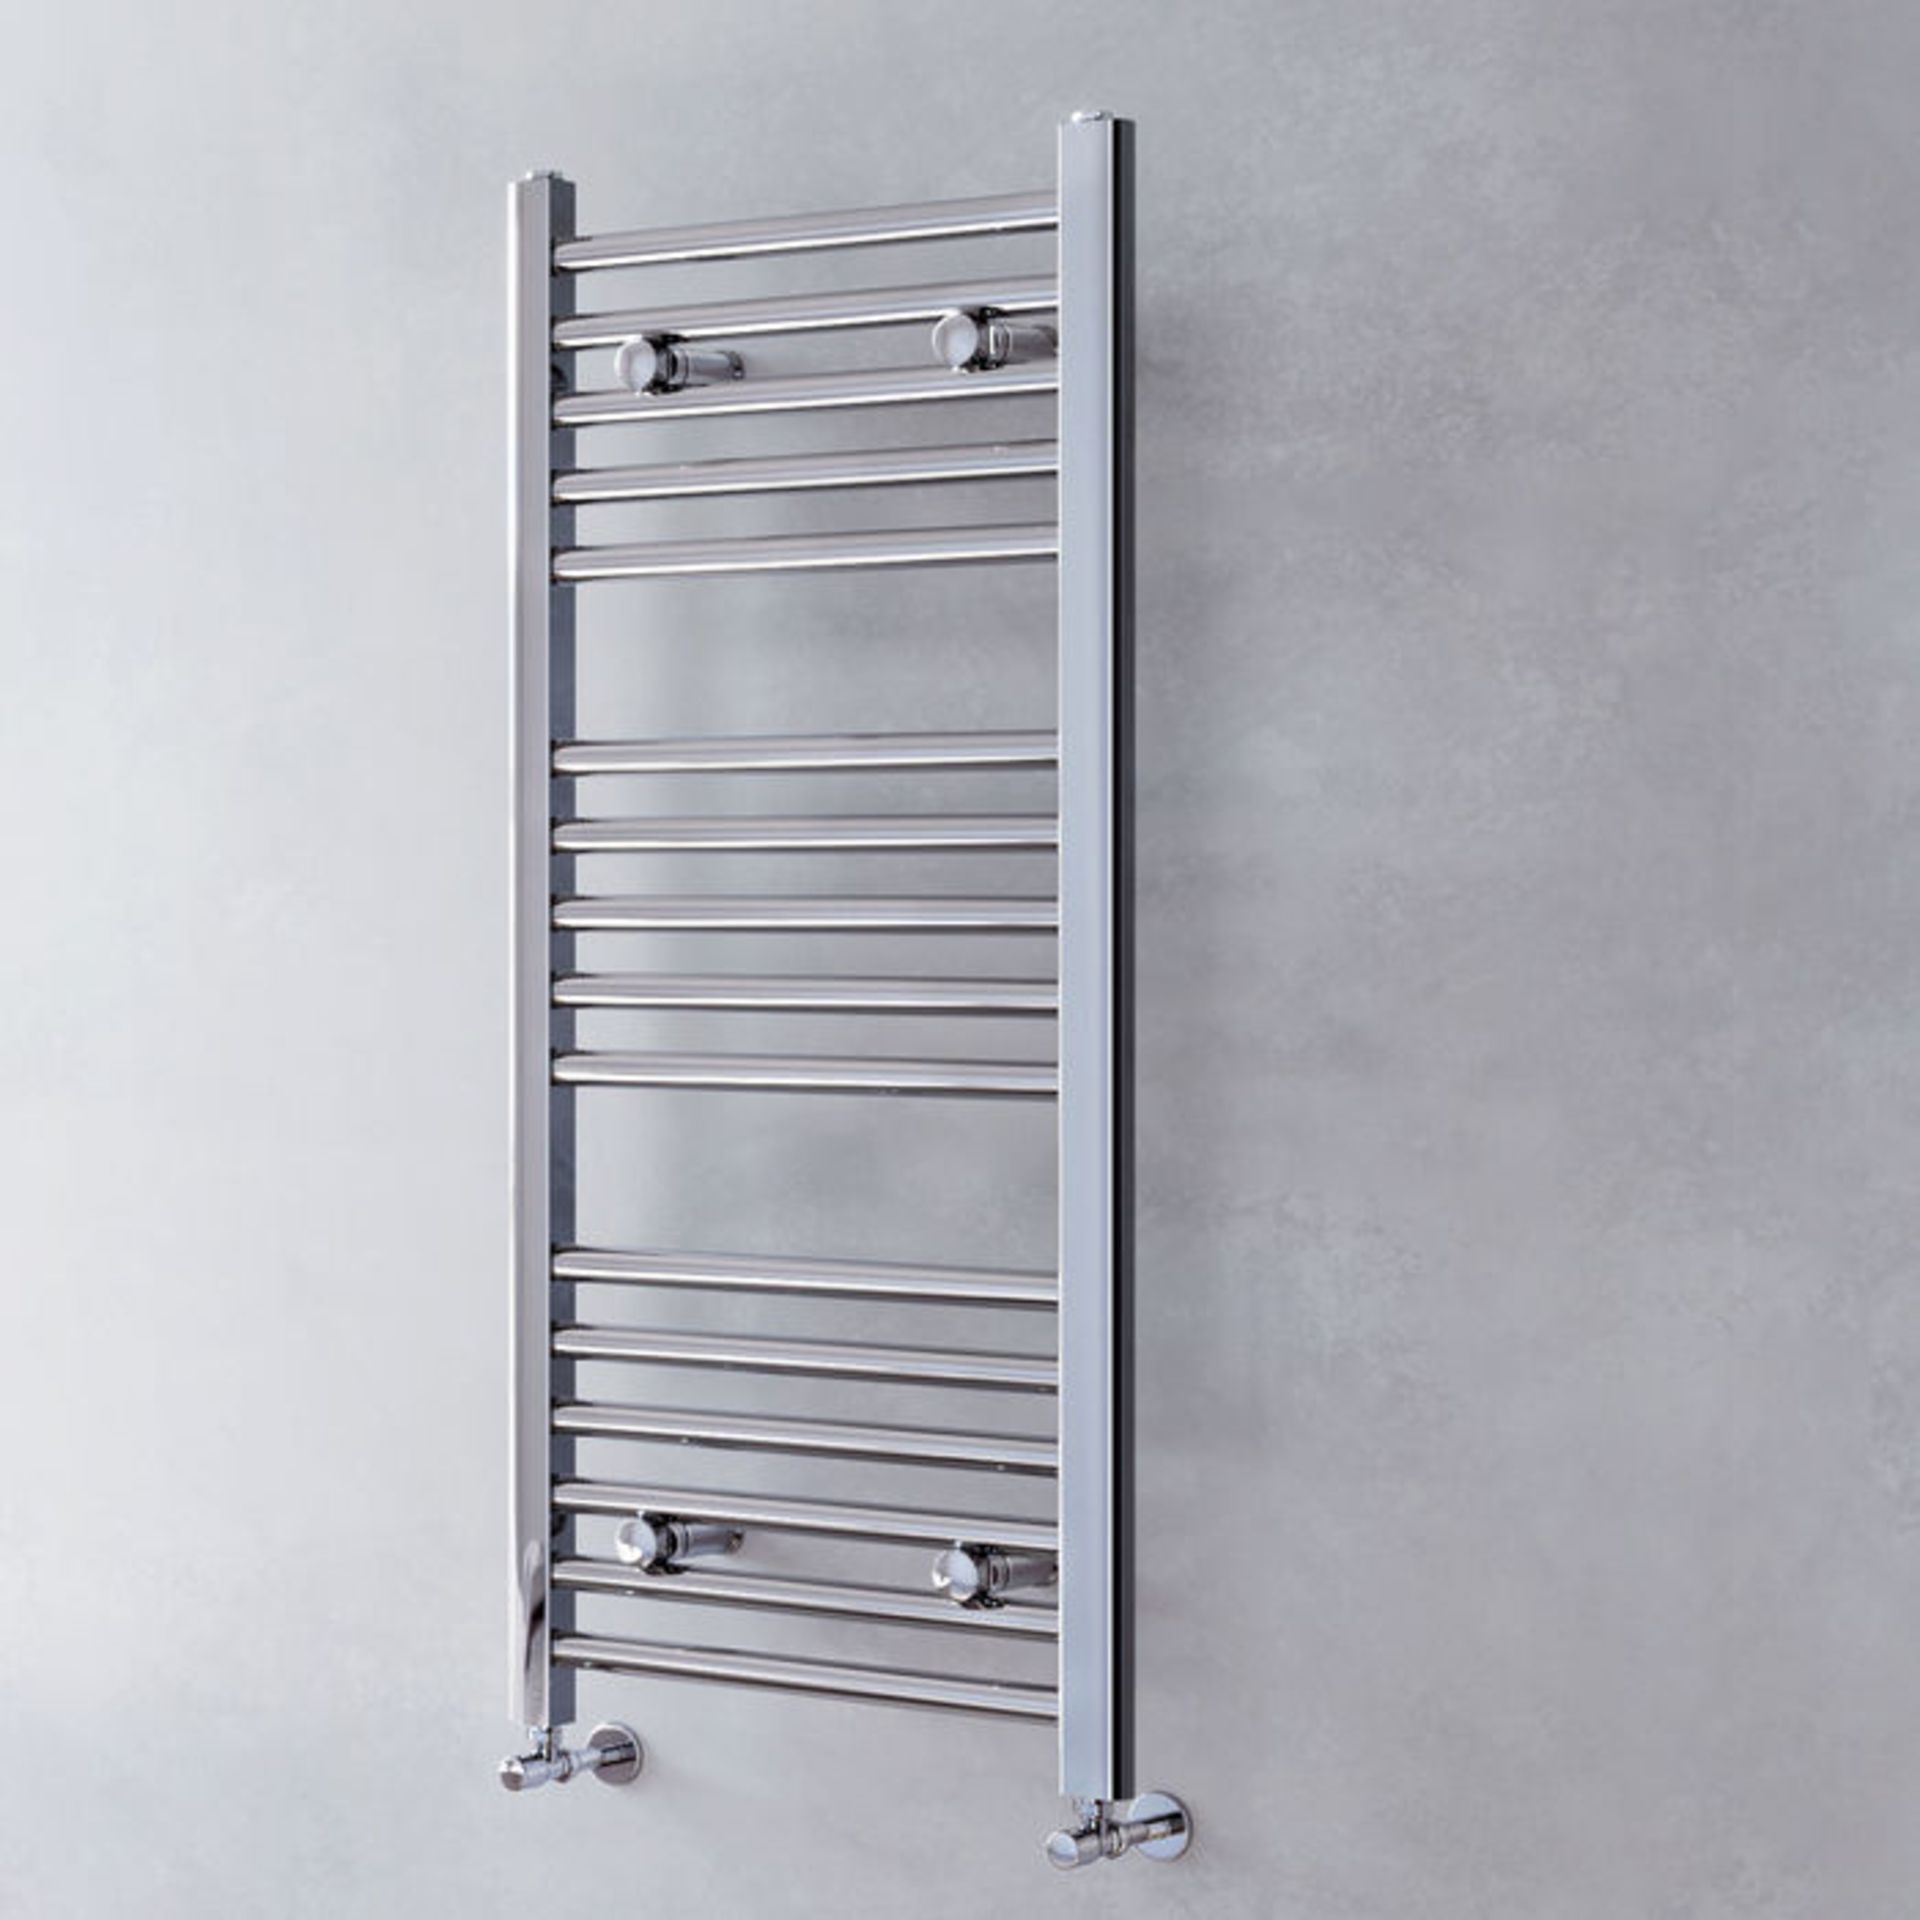 Brand New (HM133) 1000x450mm - 25mm Tubes - Chrome Heated Straight Rail Ladder Towel Radiator. This - Image 3 of 4